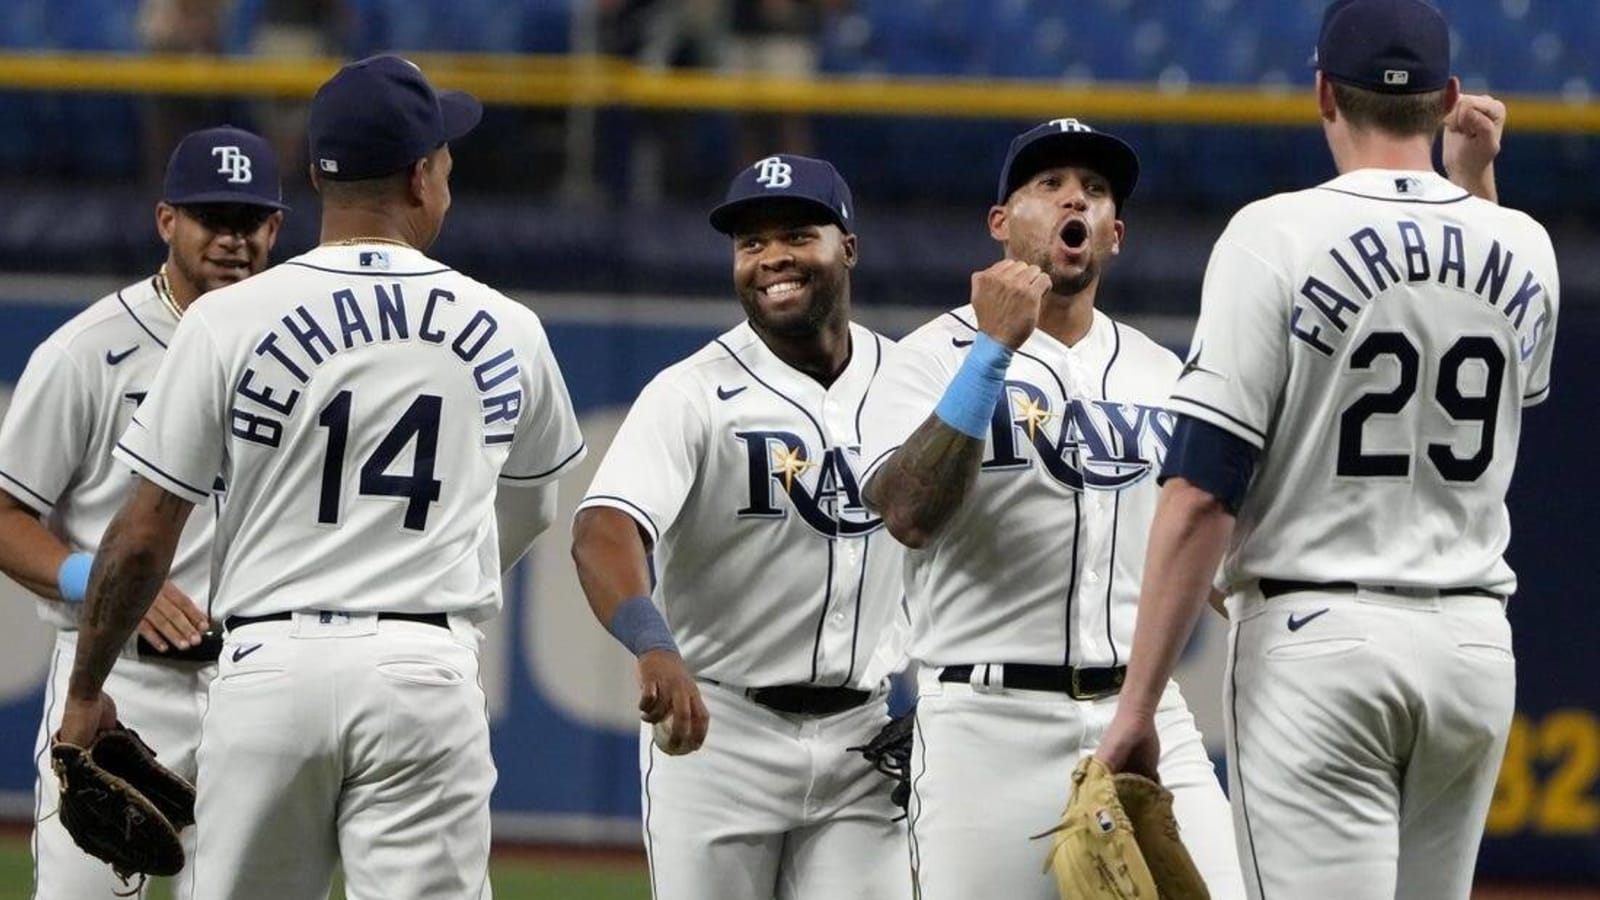 Rays hope to pick up playoff momentum in meeting with Red Sox